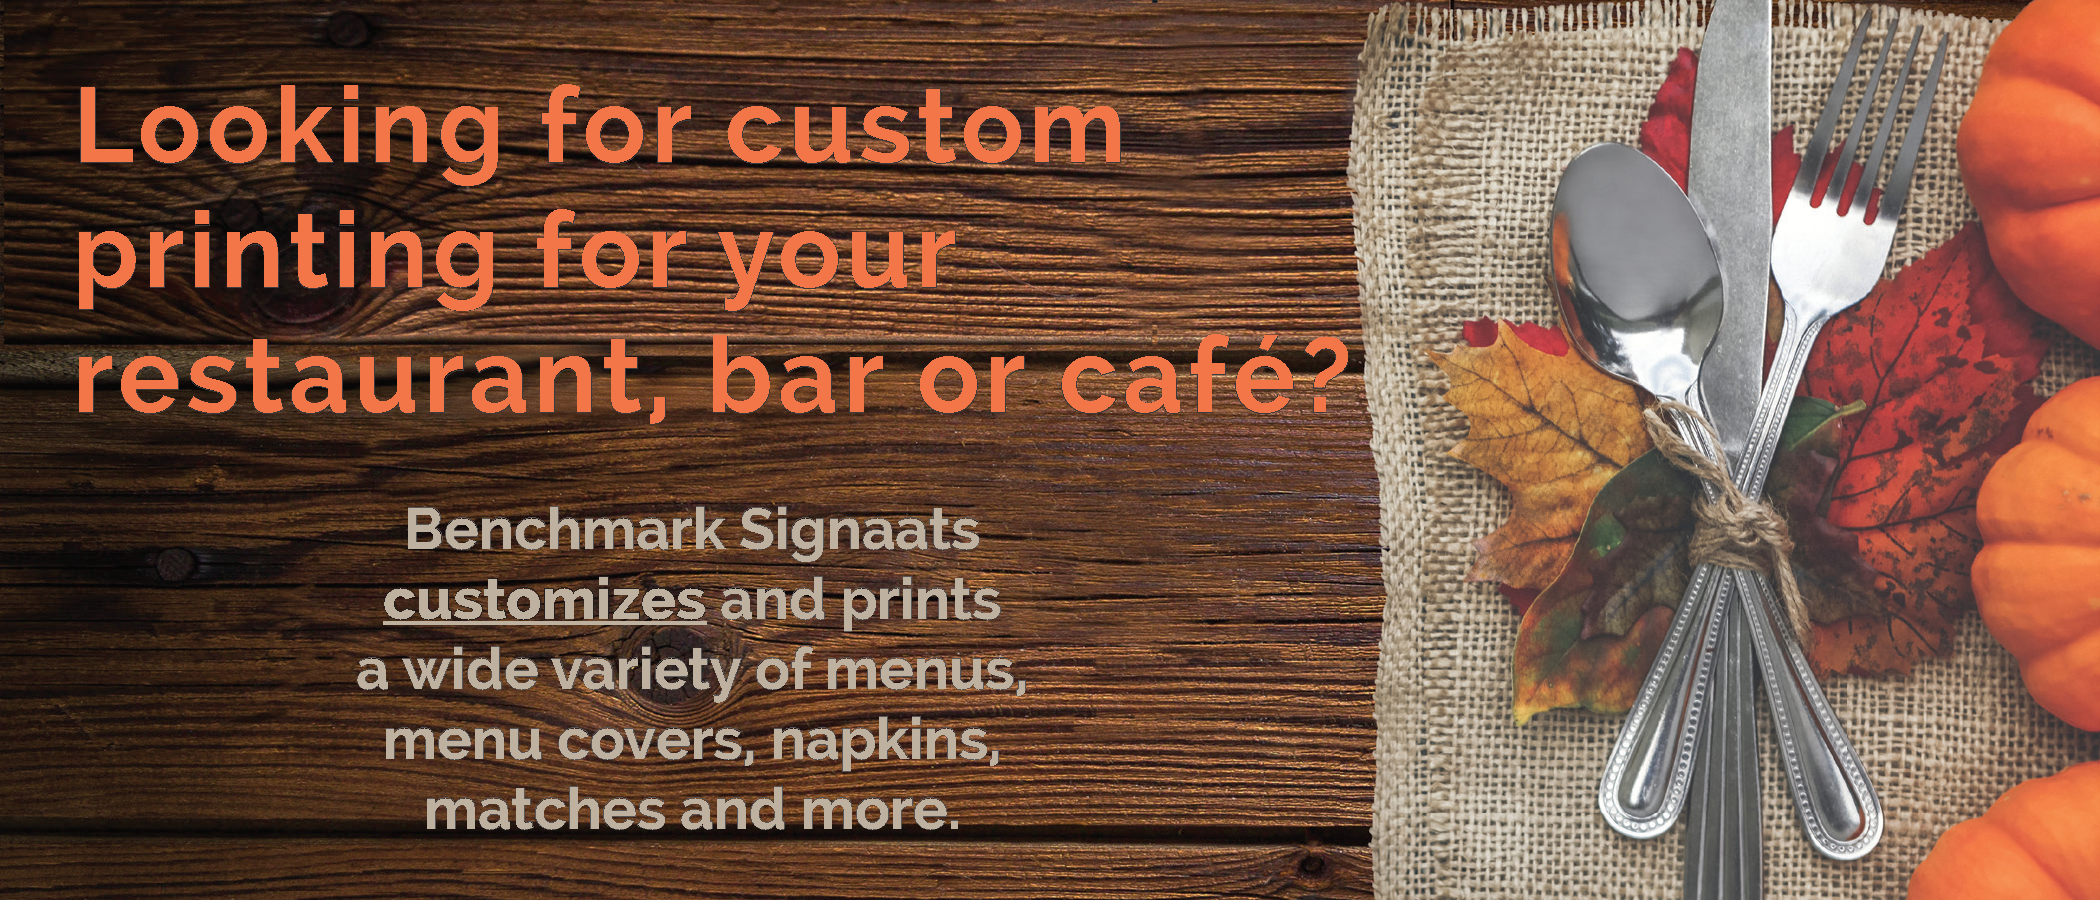 This fall print your customized menus, menu covers, napkins, matches and more.